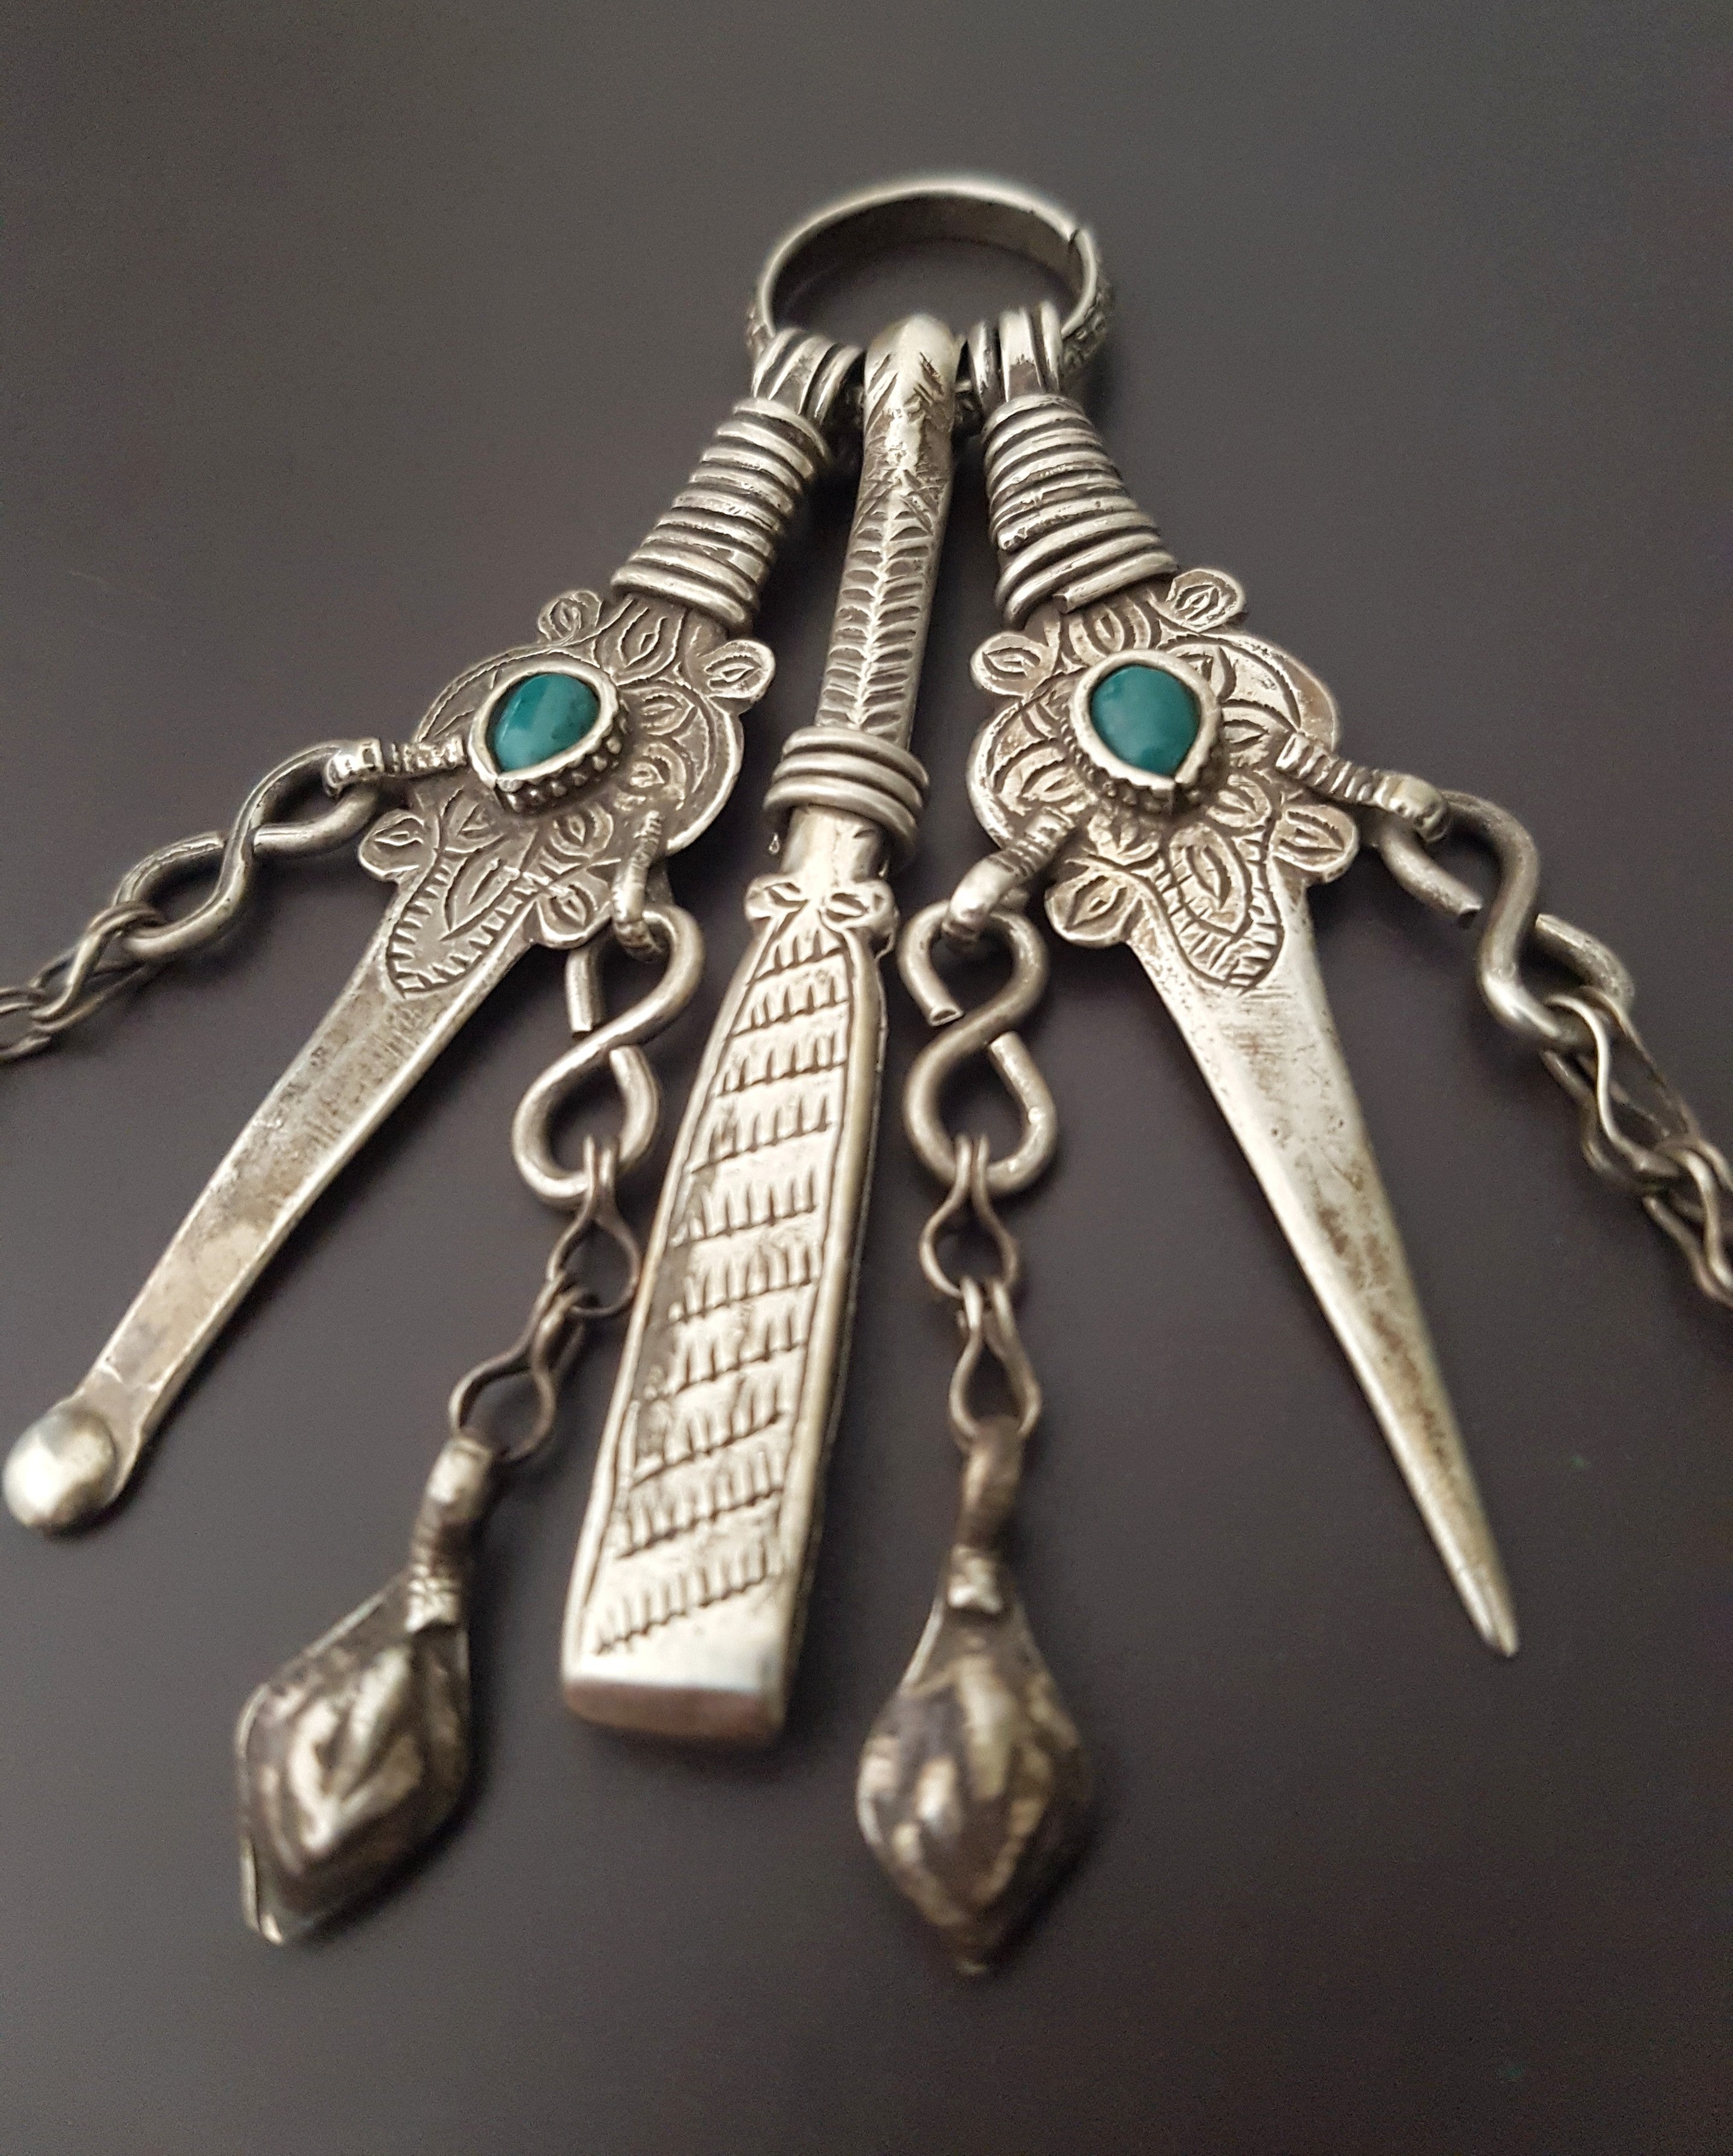 Old Grooming Kit with Turquoise and Dangles